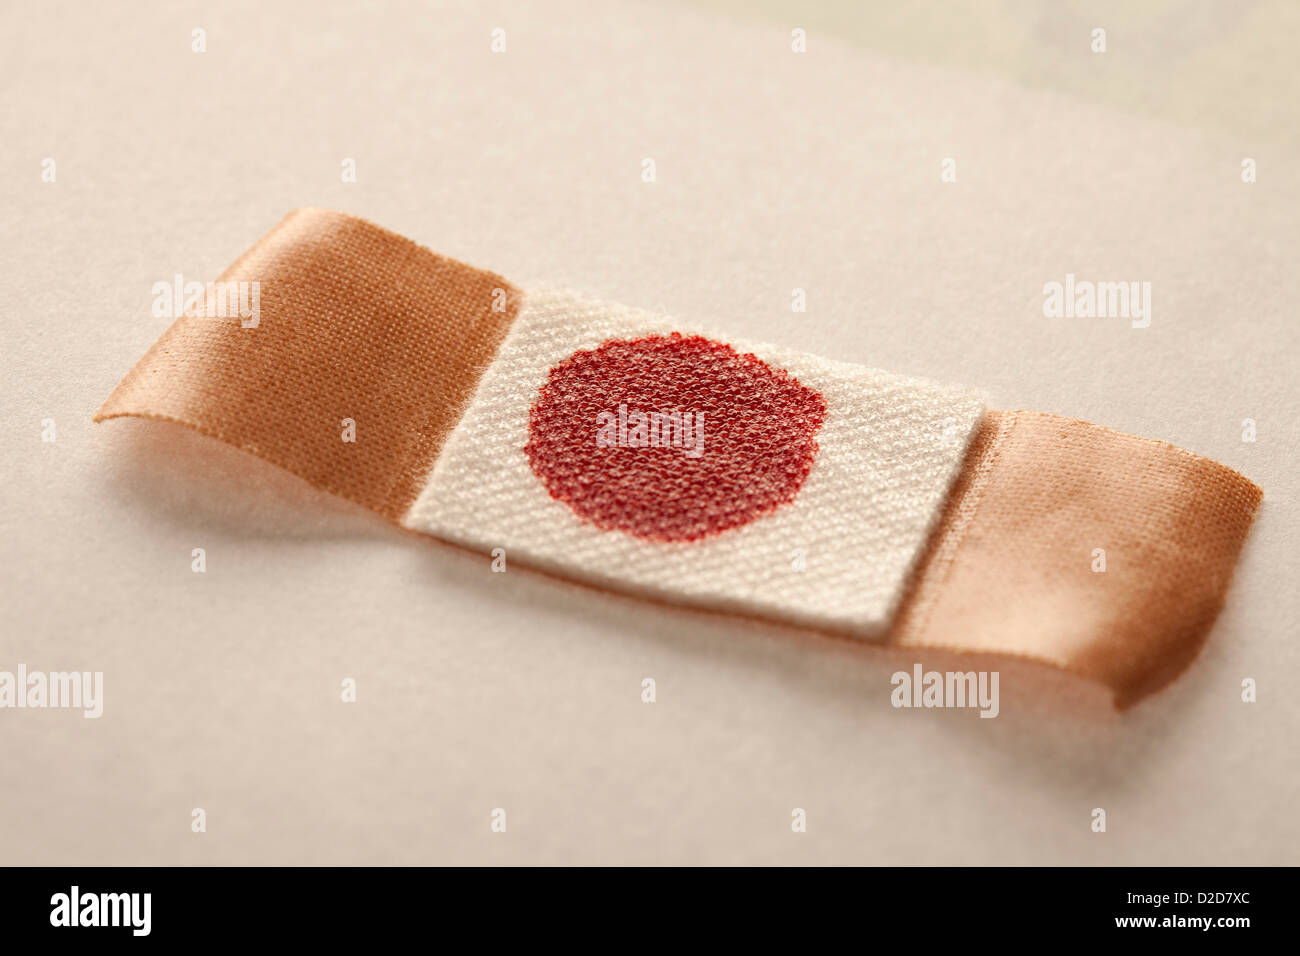 Blood stain on plaster Stock Photo